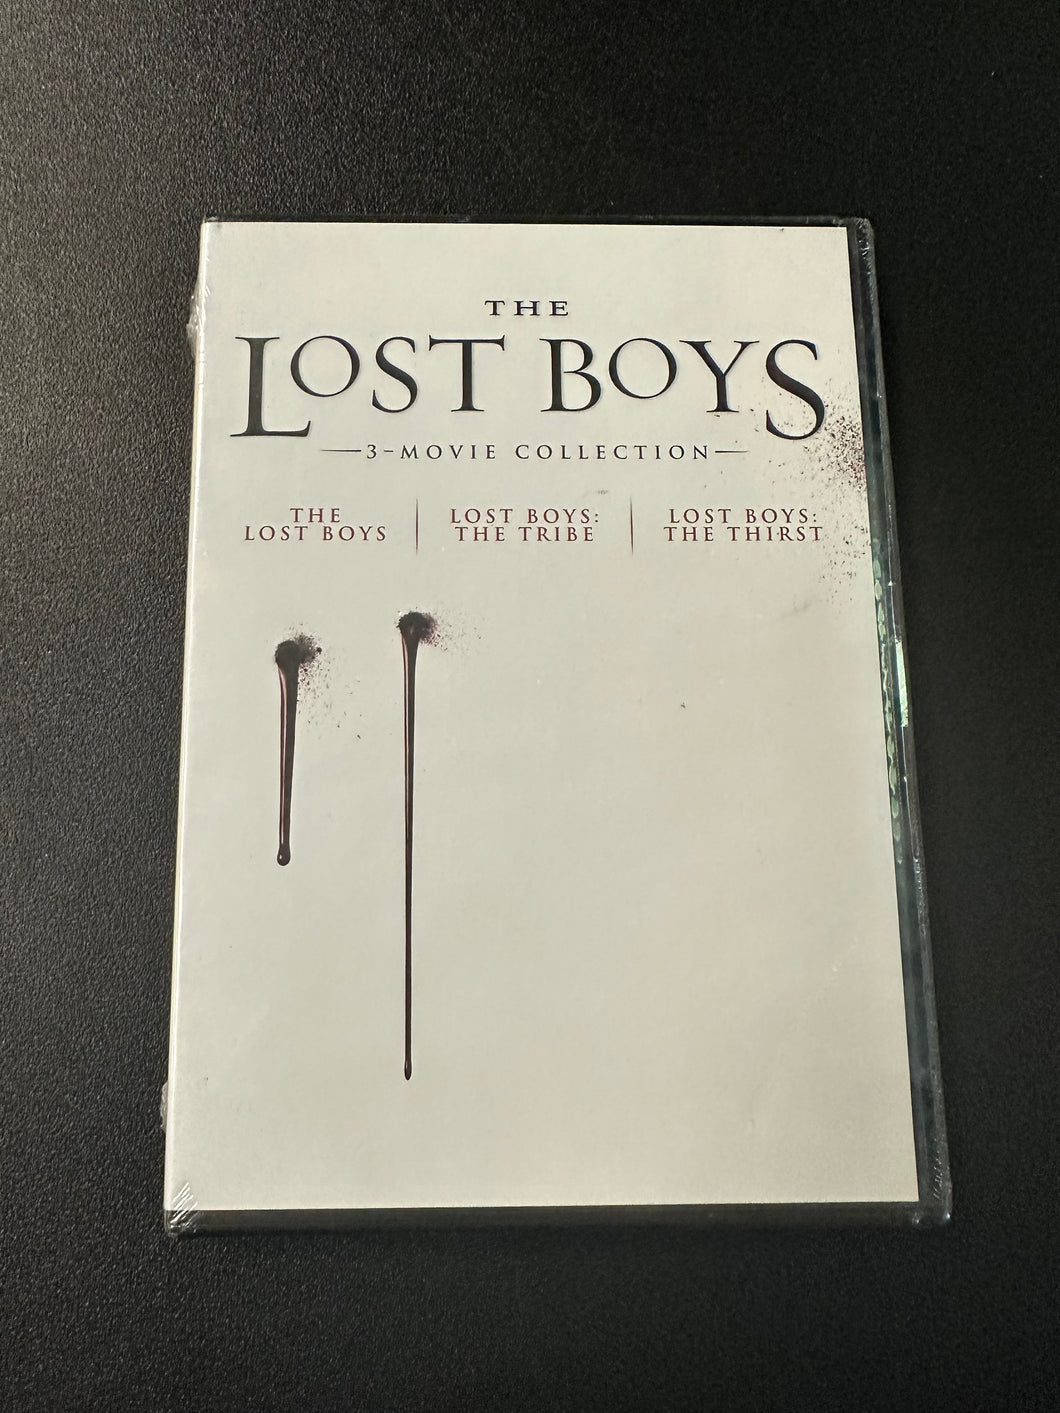 The Lost Boys 3 Movie Collection [DVD] (NEW) Sealed